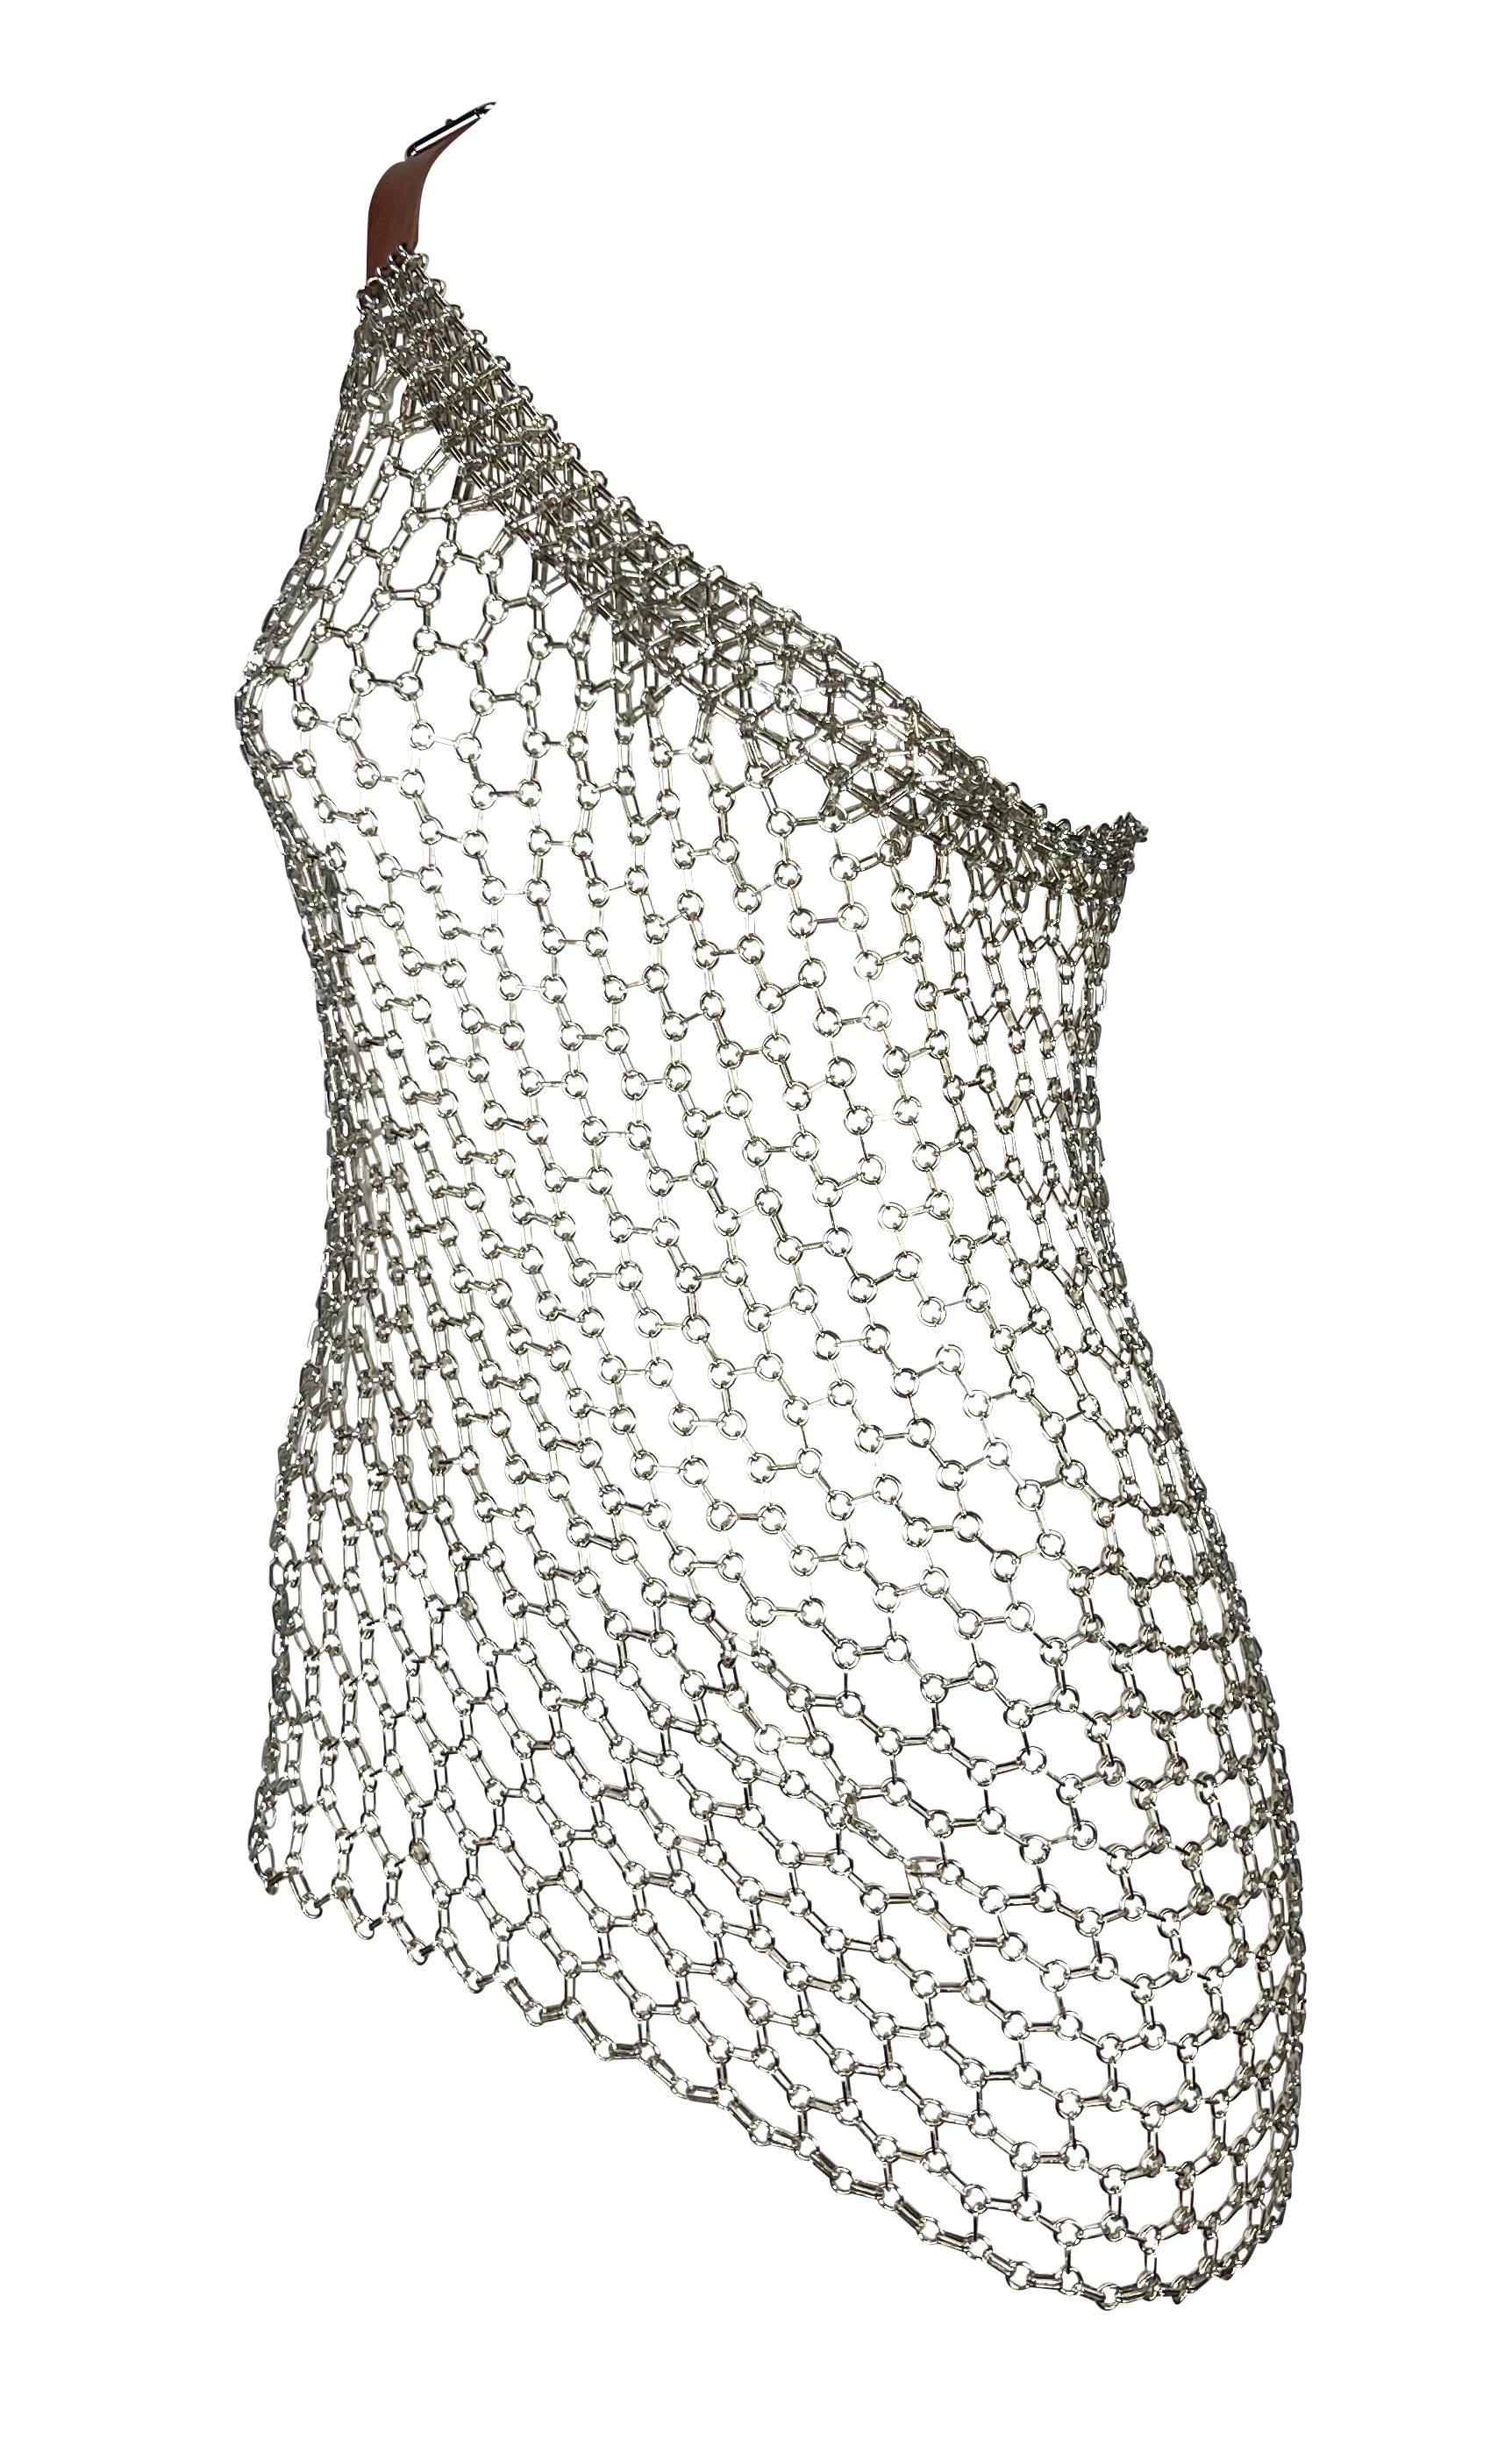 Presenting a silvertone Dolce and Gabbana chainmail metal buckle top. From the Spring/Summer 2003 'Sex & Love' collection, this top features a single-shoulder design and a tanned leather adjustable belt as the shoulder strap. Inspired by the